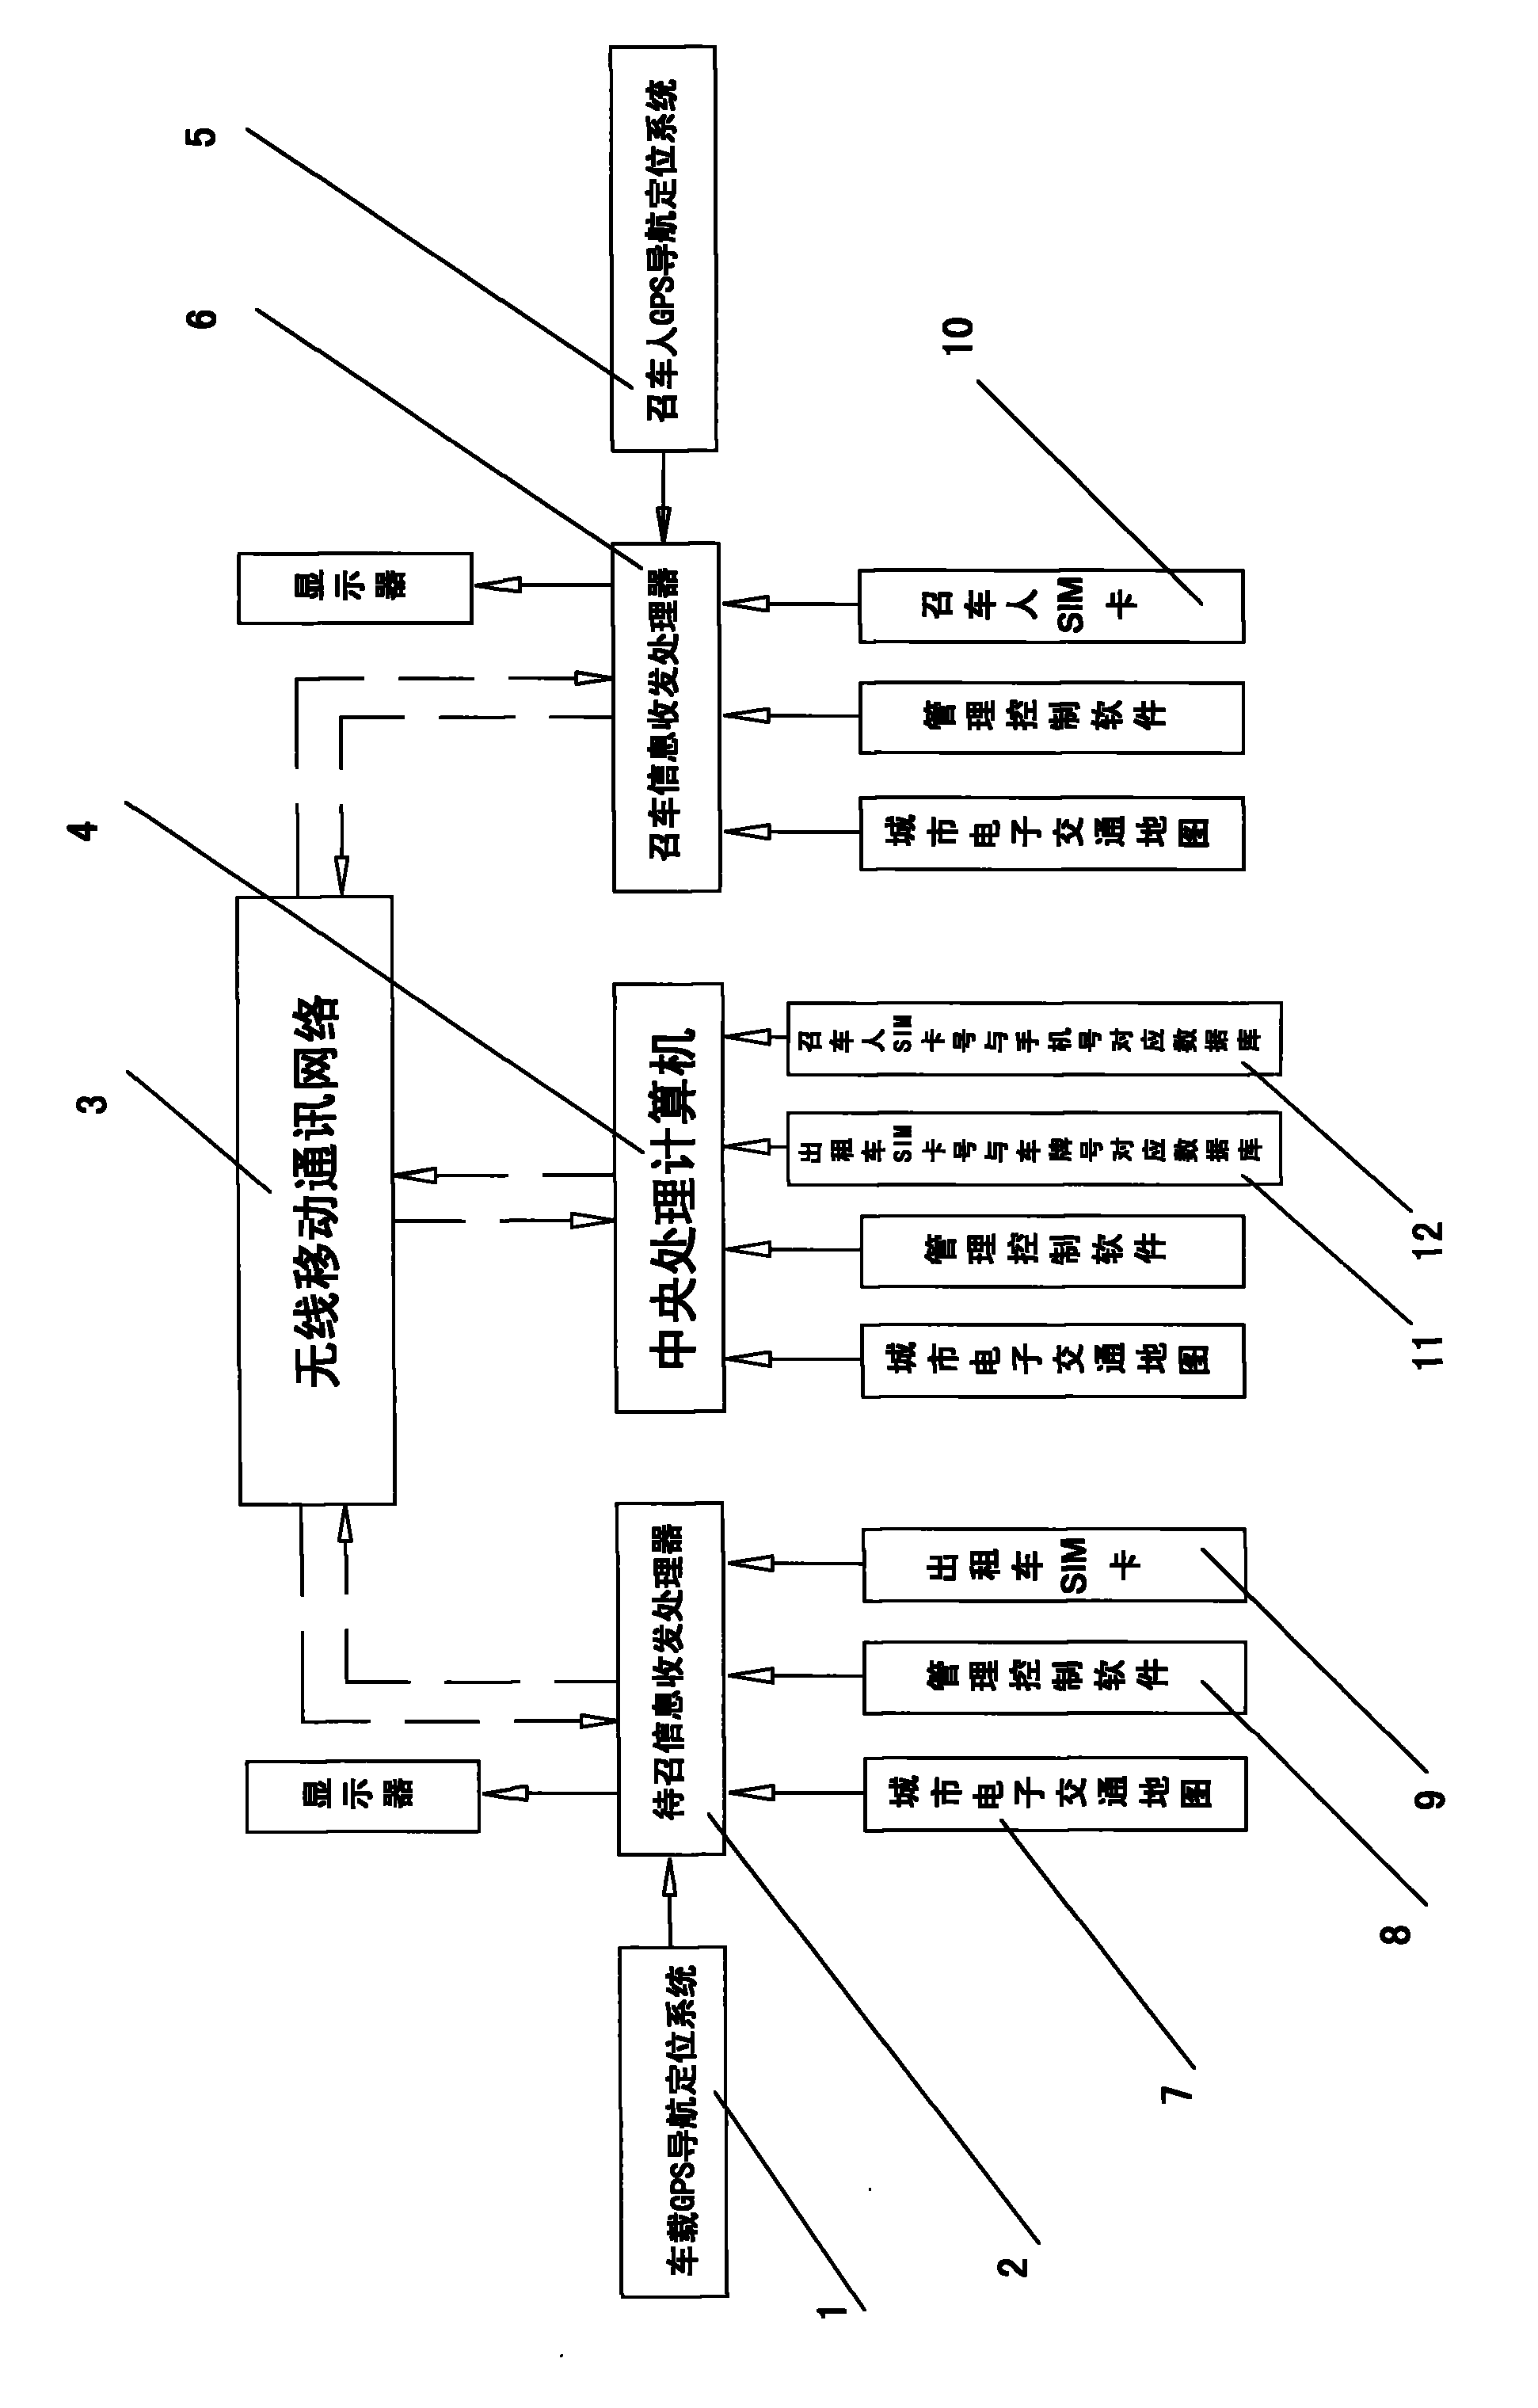 System and method for remote inquiry and call of idle taxi